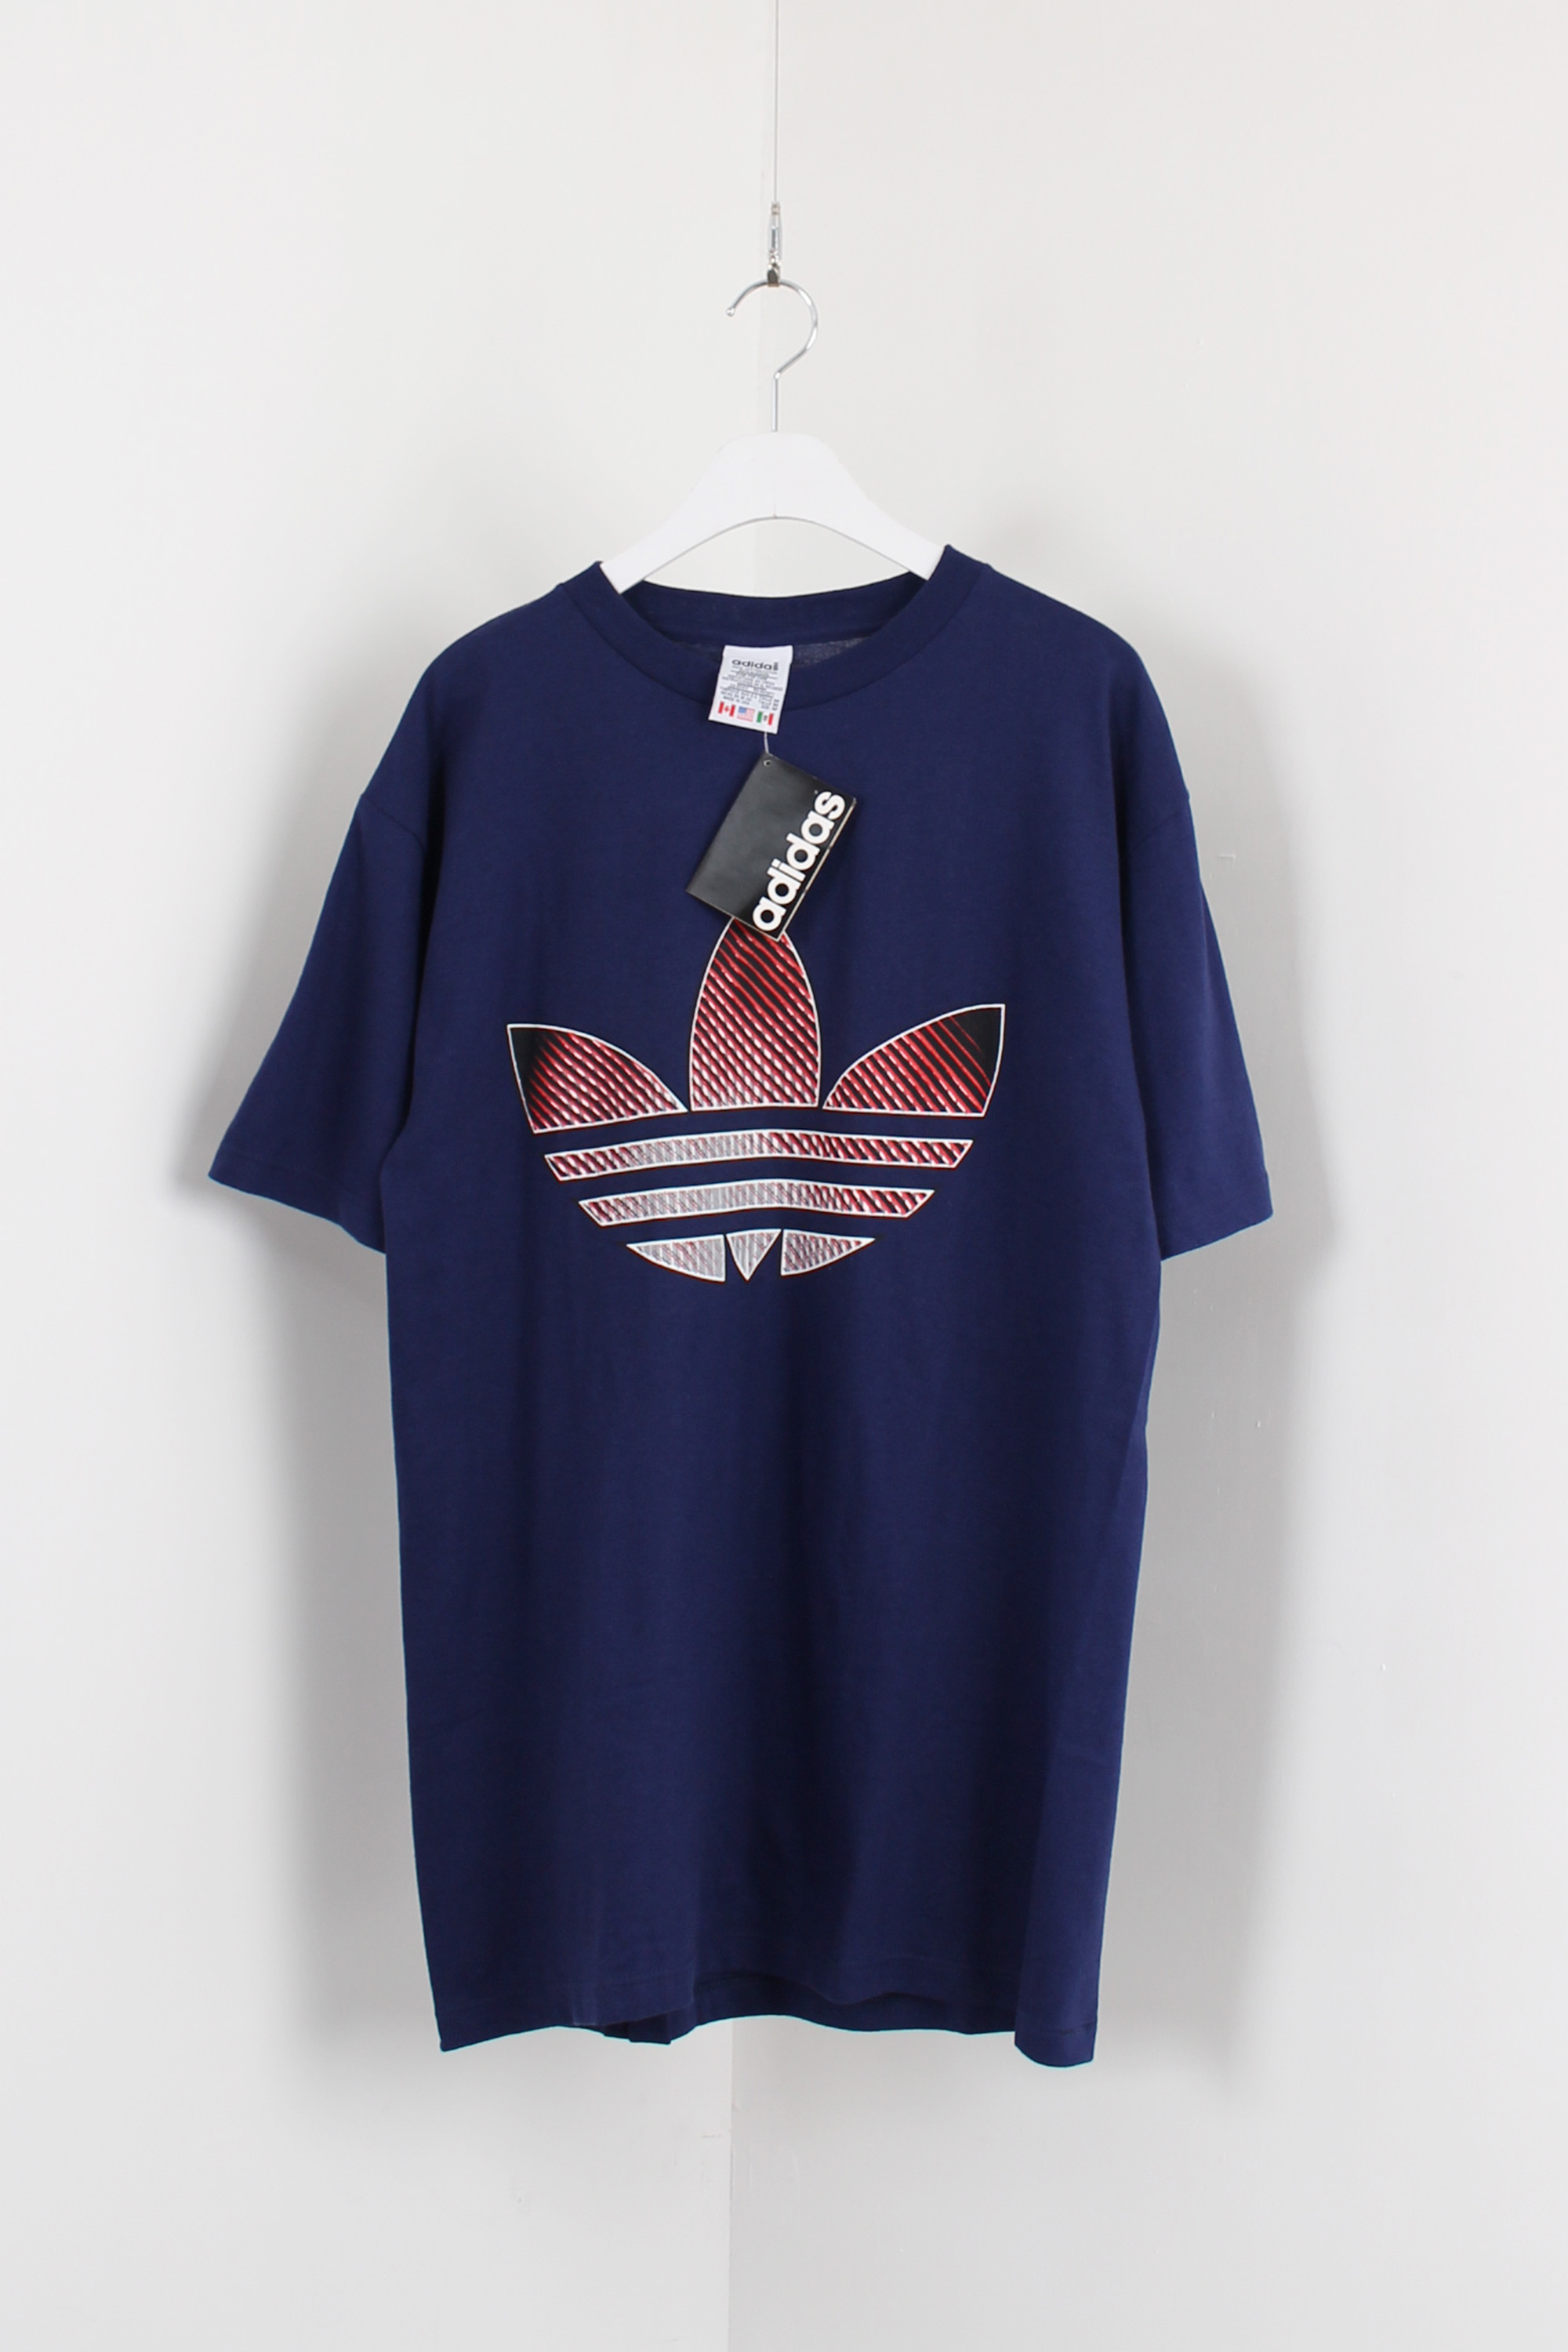 ADIDAS (made in U.S.A)